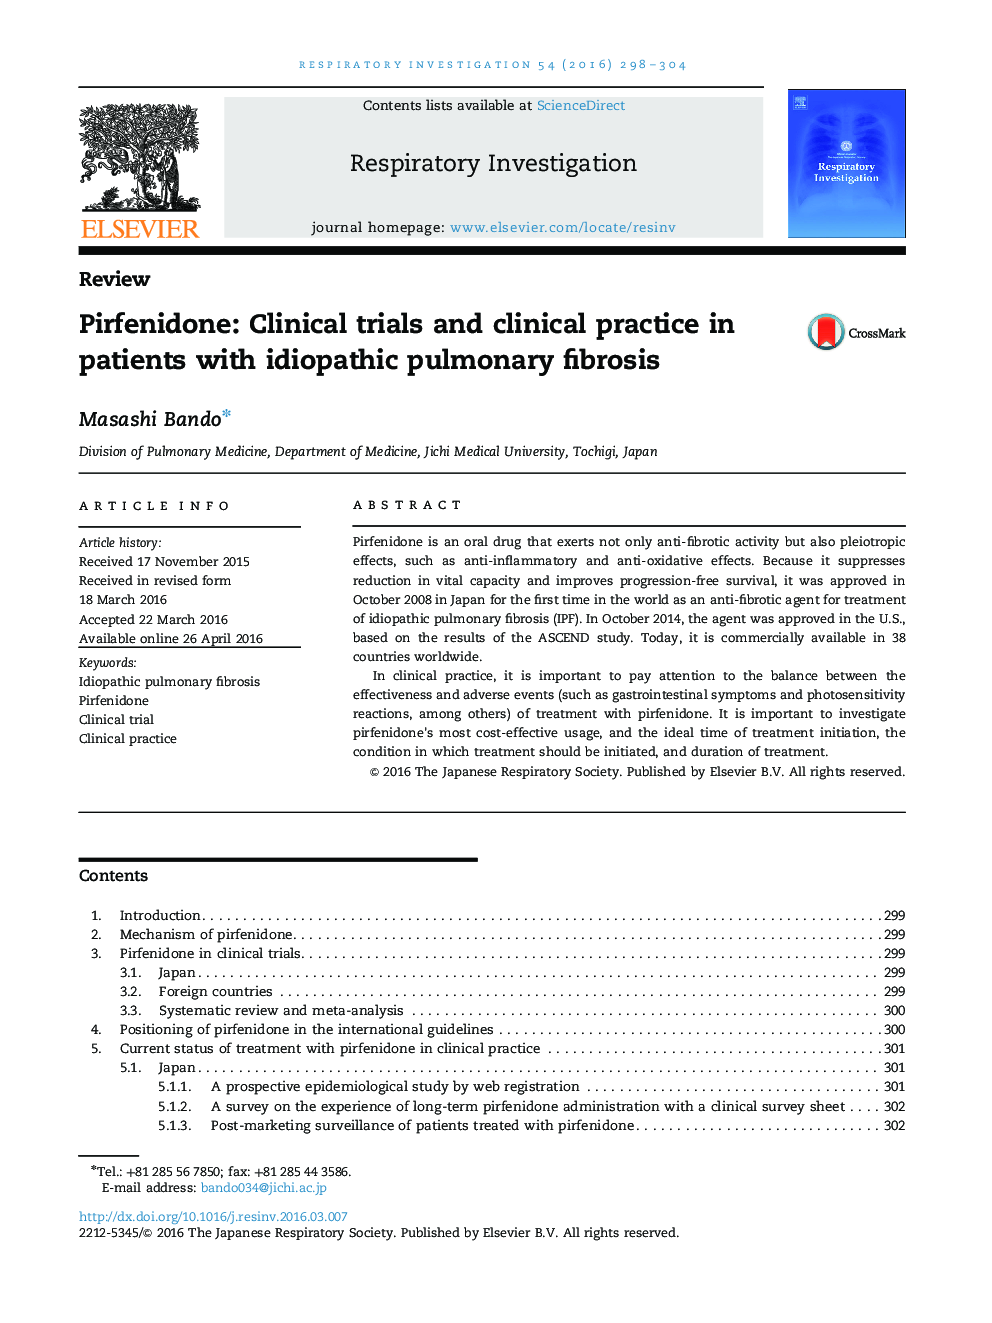 Pirfenidone: Clinical trials and clinical practice in patients with idiopathic pulmonary fibrosis